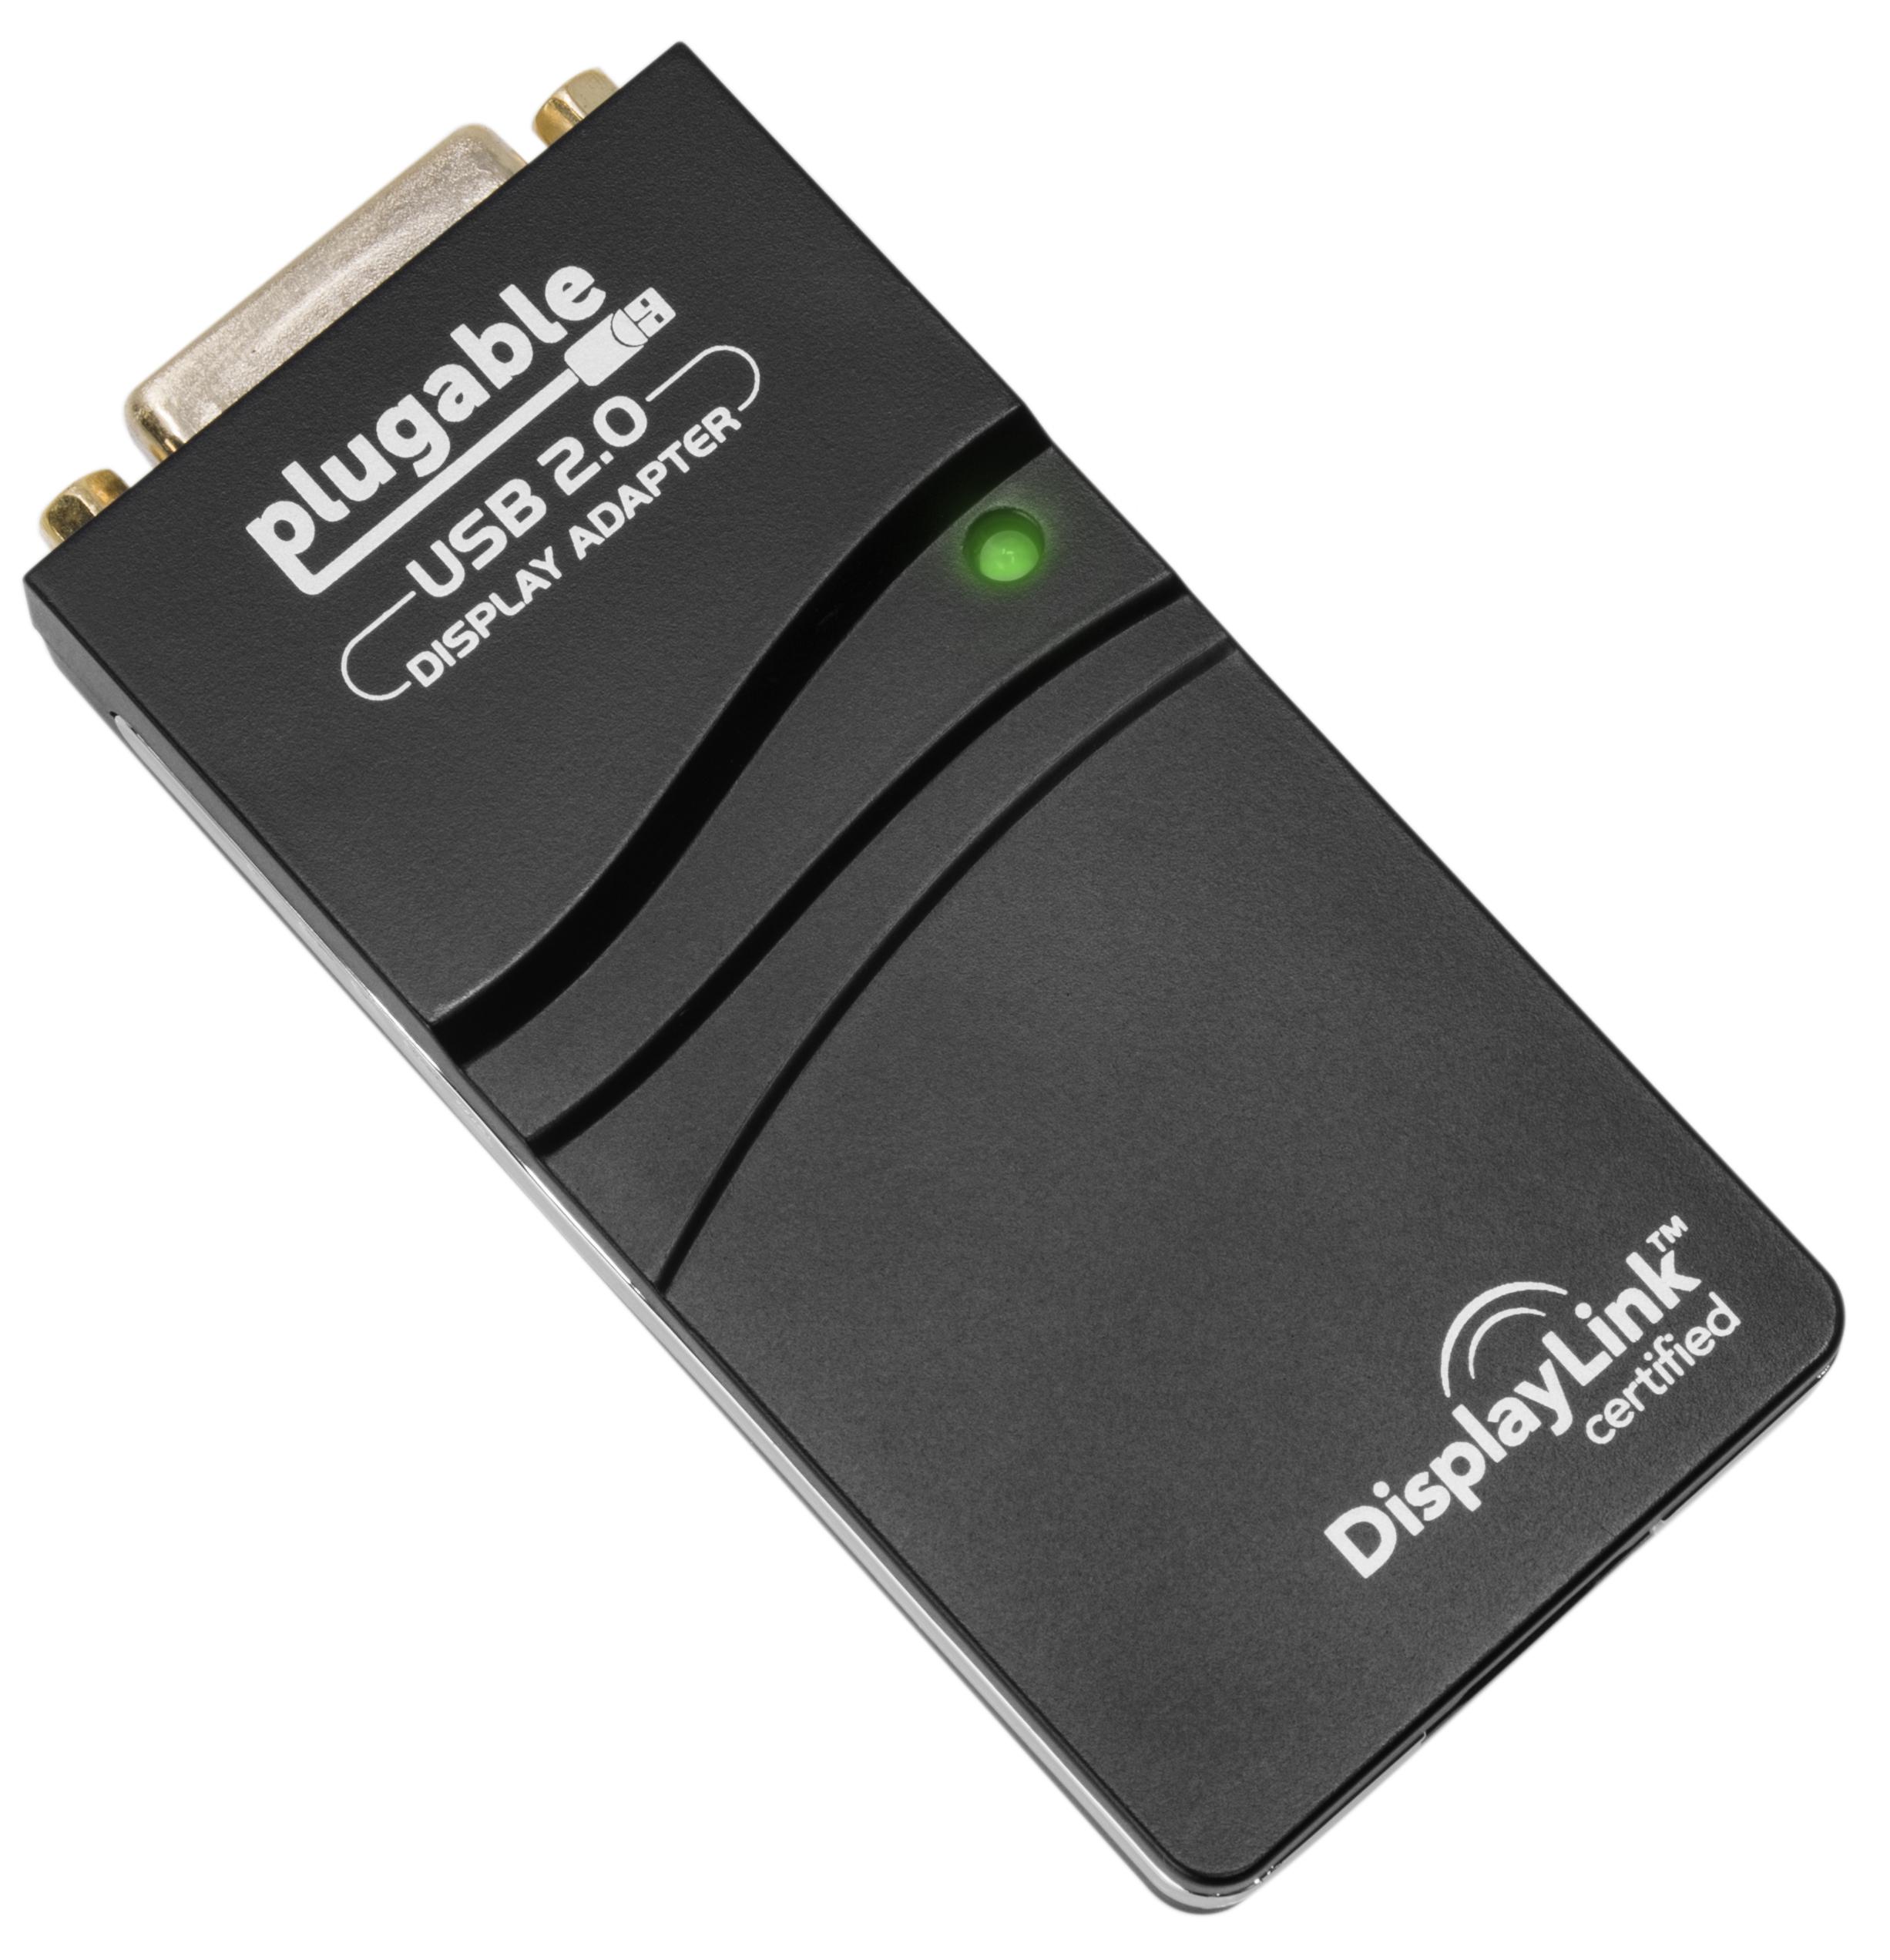 Plugable USB 2.0 to DVI/VGA/HDMI Video Graphics Adapter for Multiple Monitors up to 1920x1080 Supports Windows 10, 8.1, 7, XP, and Mac 10.14+ - image 3 of 5